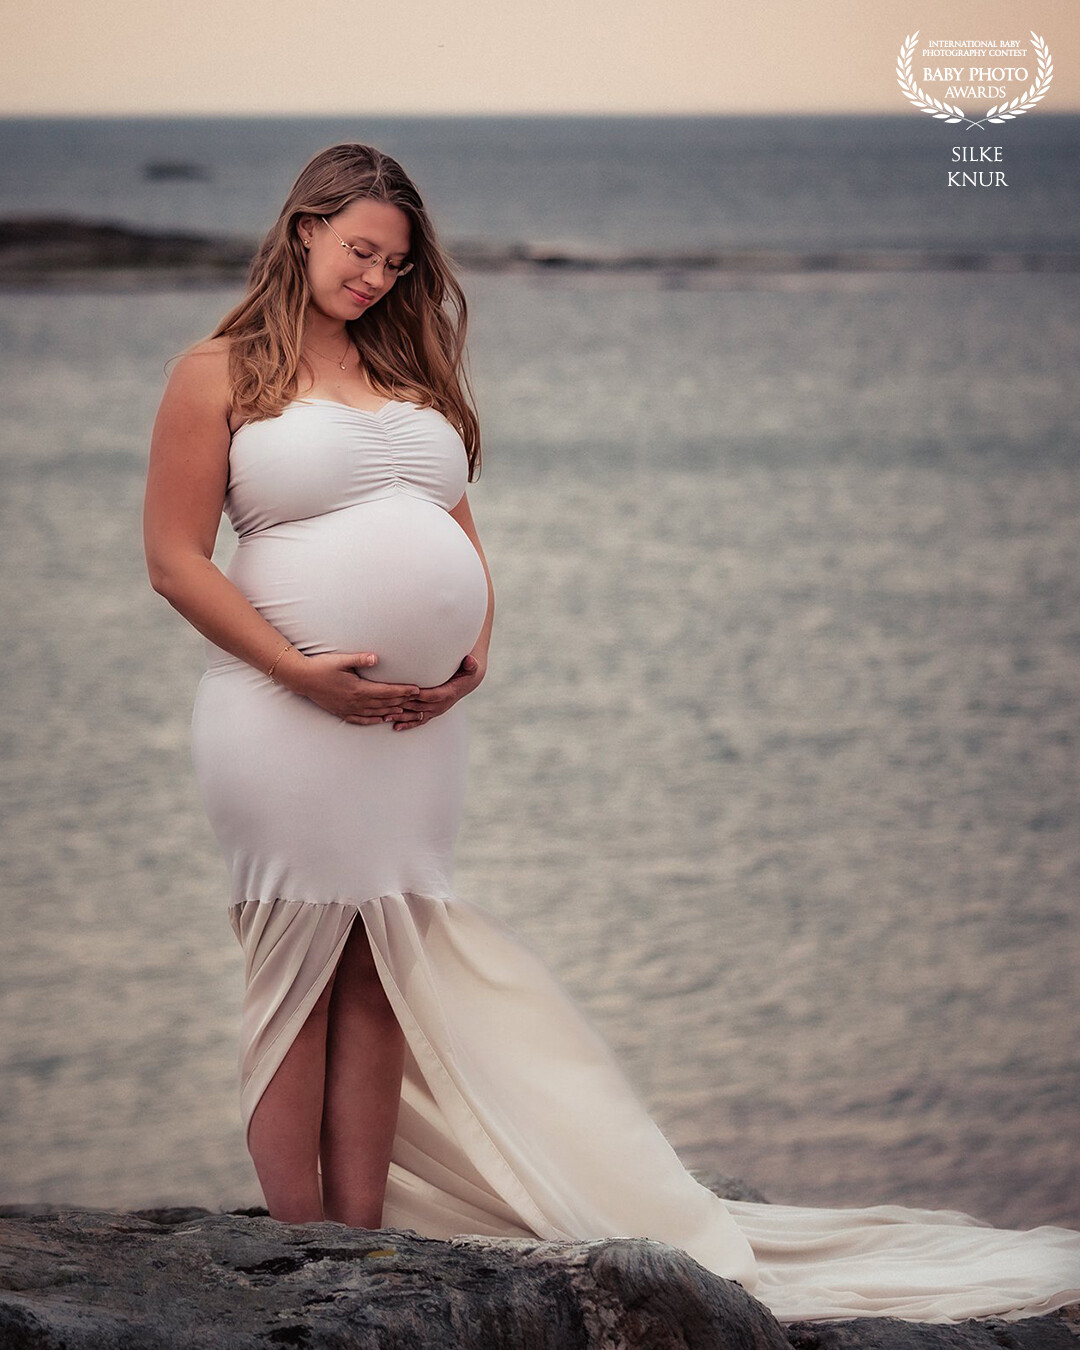 When you can see the emotions and connection between mother and unborn child through the camera, it makes me happy.